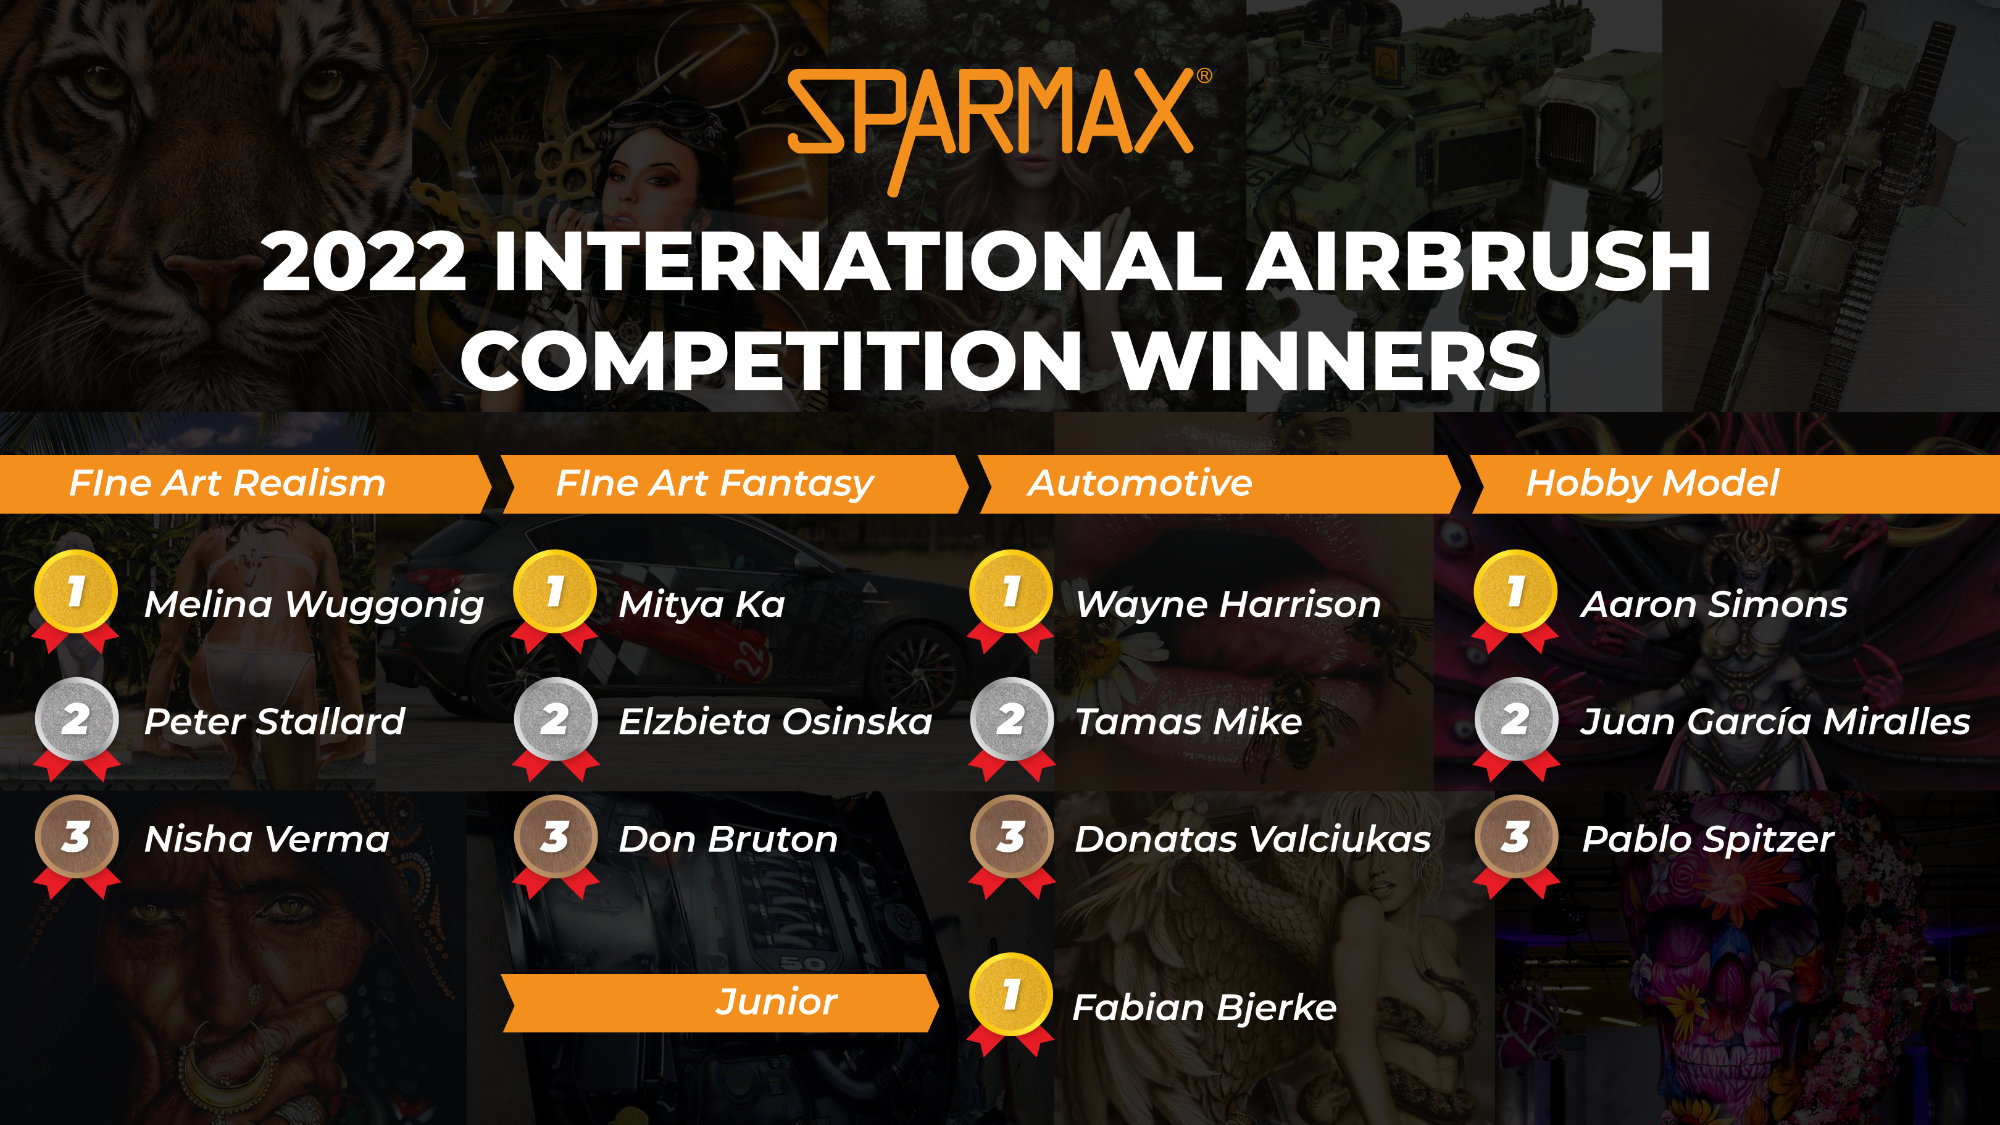 The winners of the Sparmax 2022 International Airbrush Competition